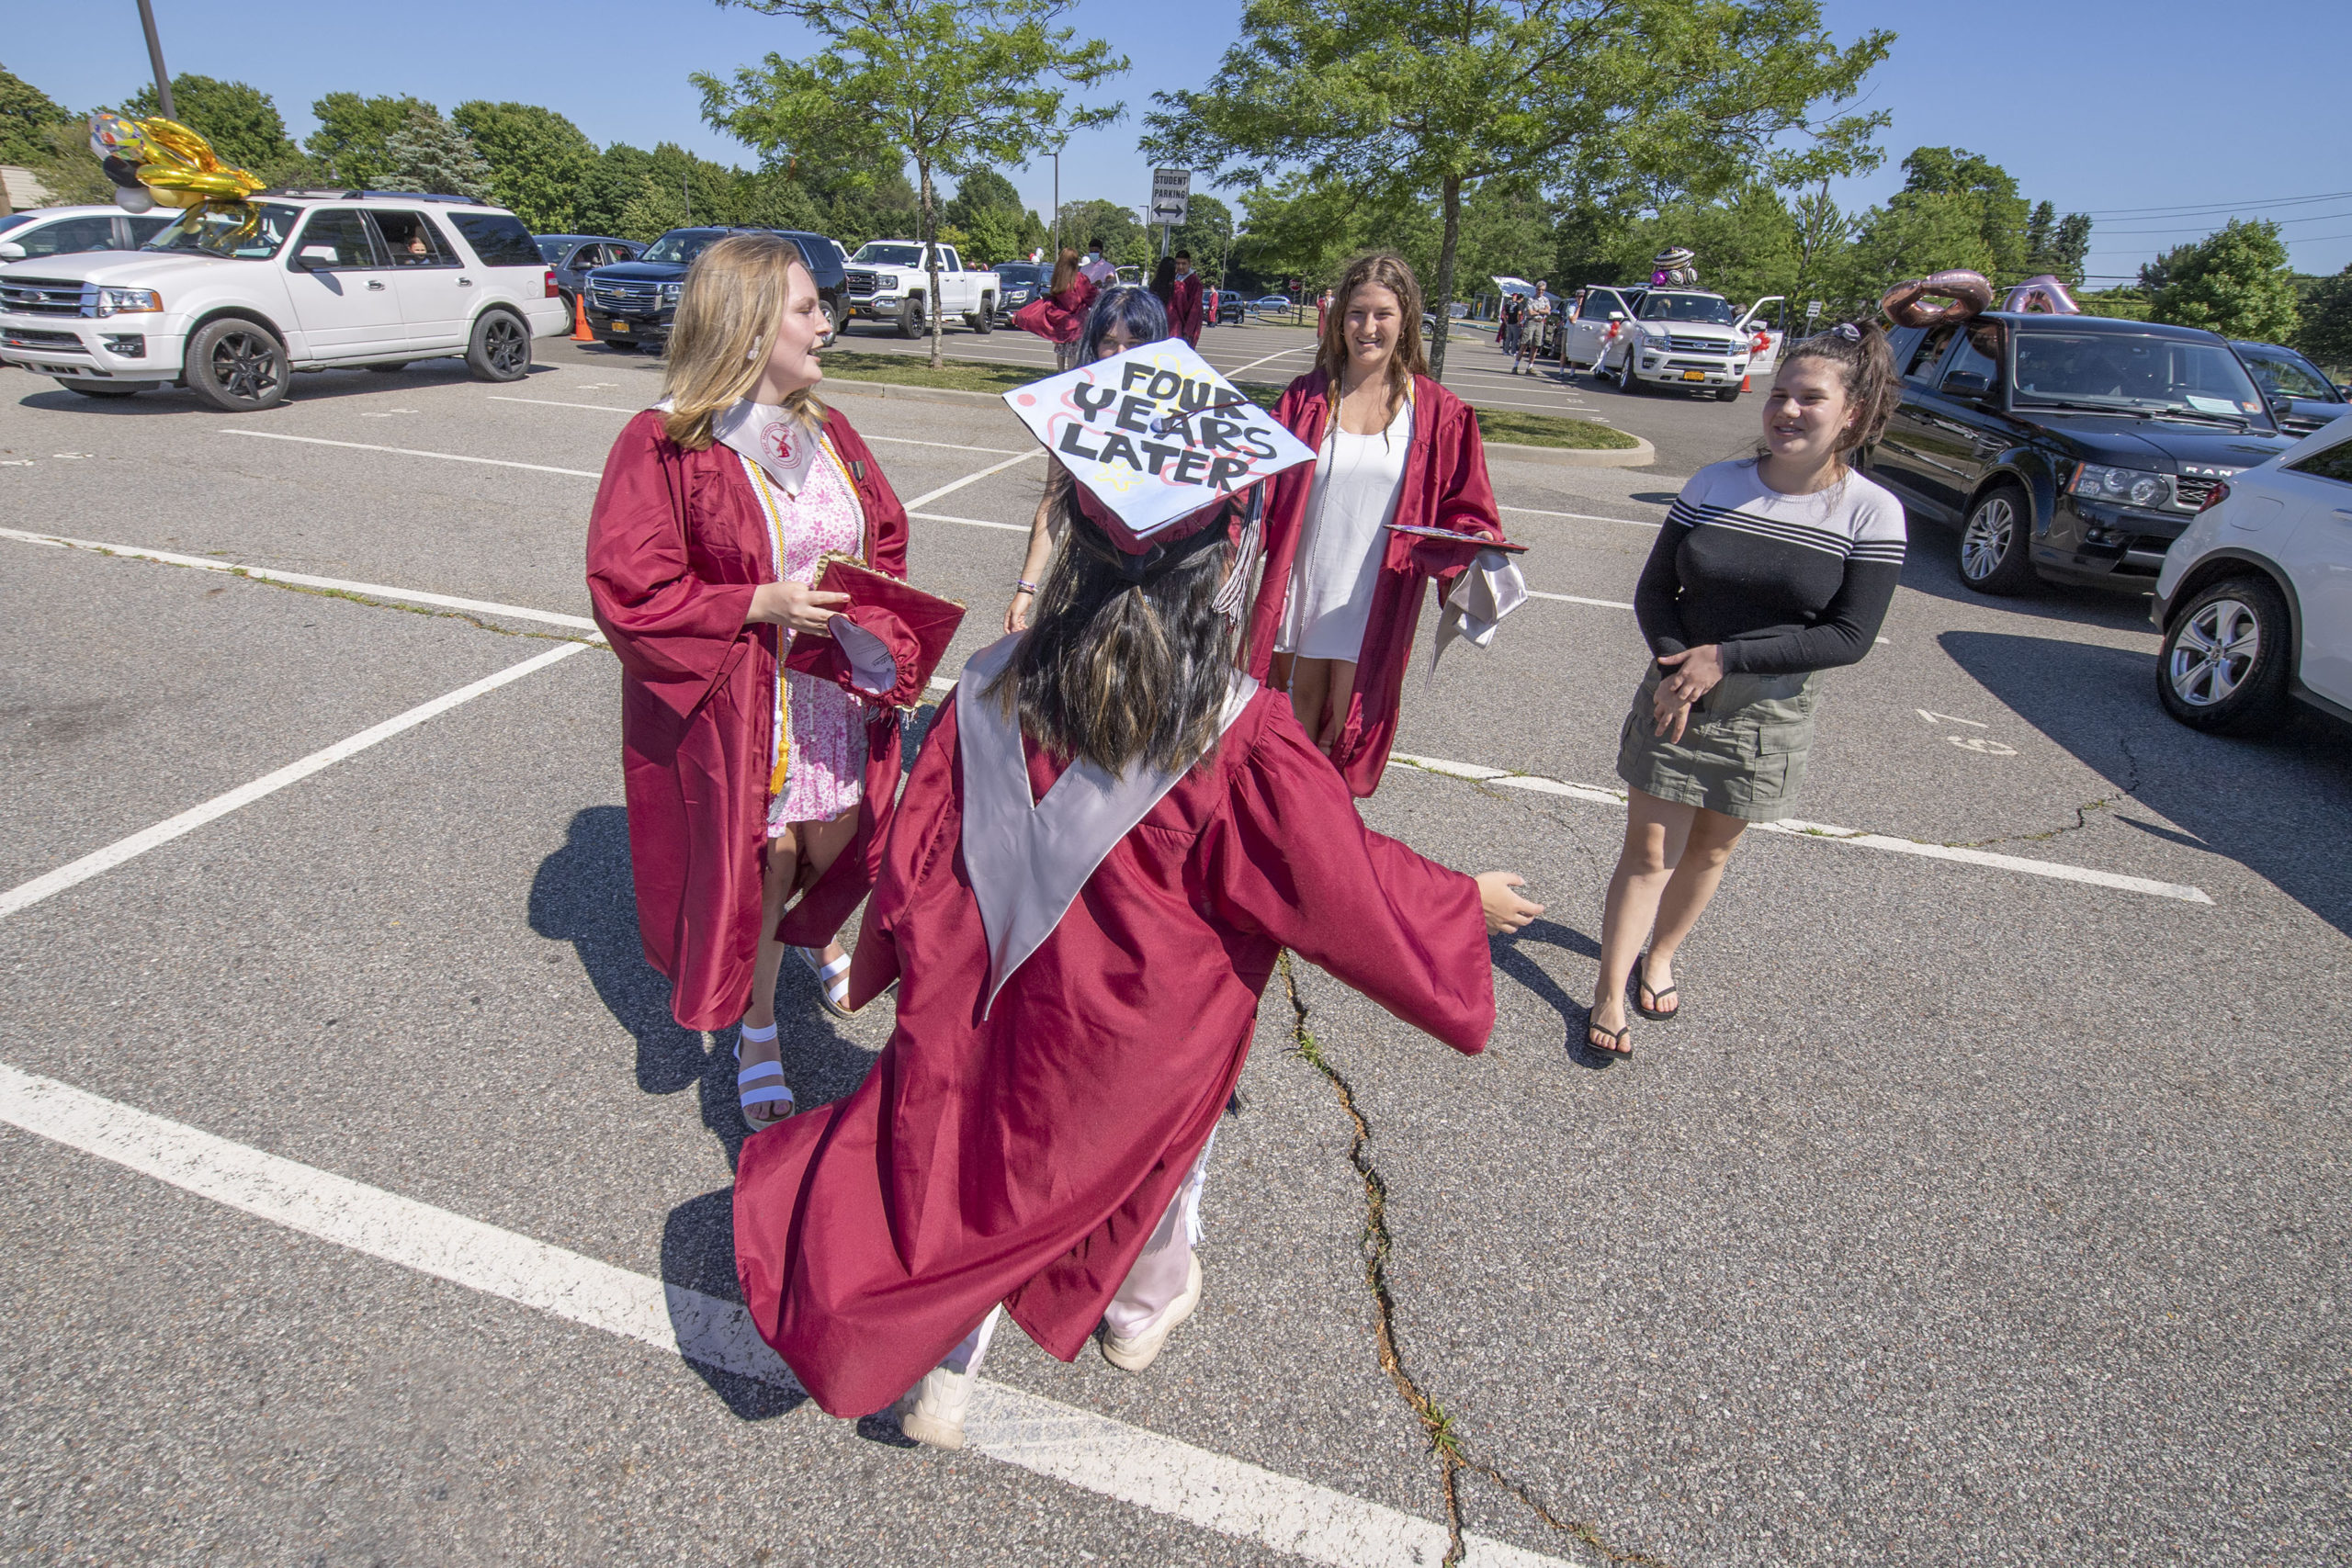 East Hampton High School Senior Han Le greets her classmates in the parking lot as she gets ready to participate in the 2020 graduation ceremony at the East Hampton High School on Friday.